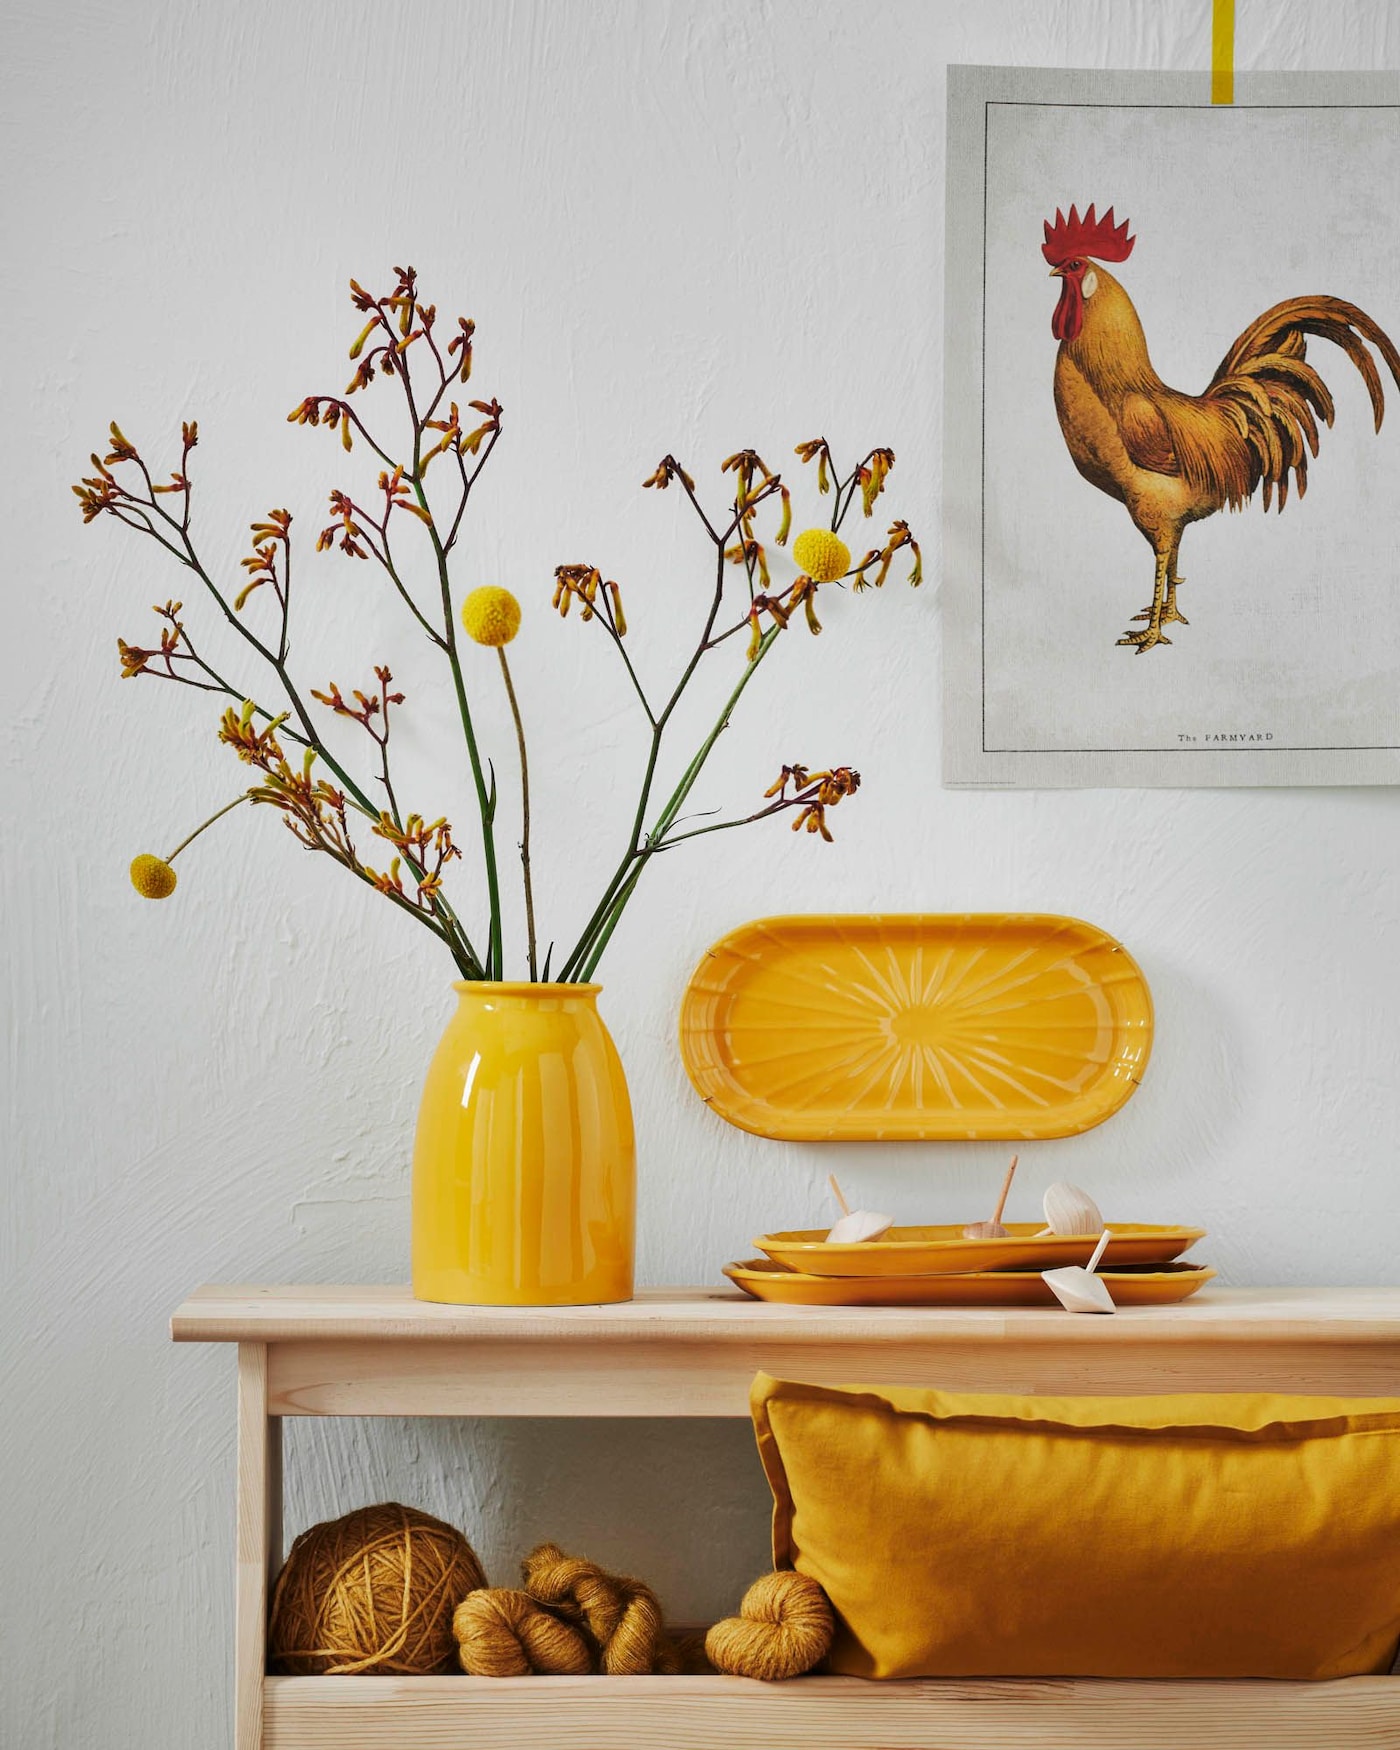 A wooden bench with storage, styled with ceramics, balls of yarn and a cushion – all in vibrant yellow.